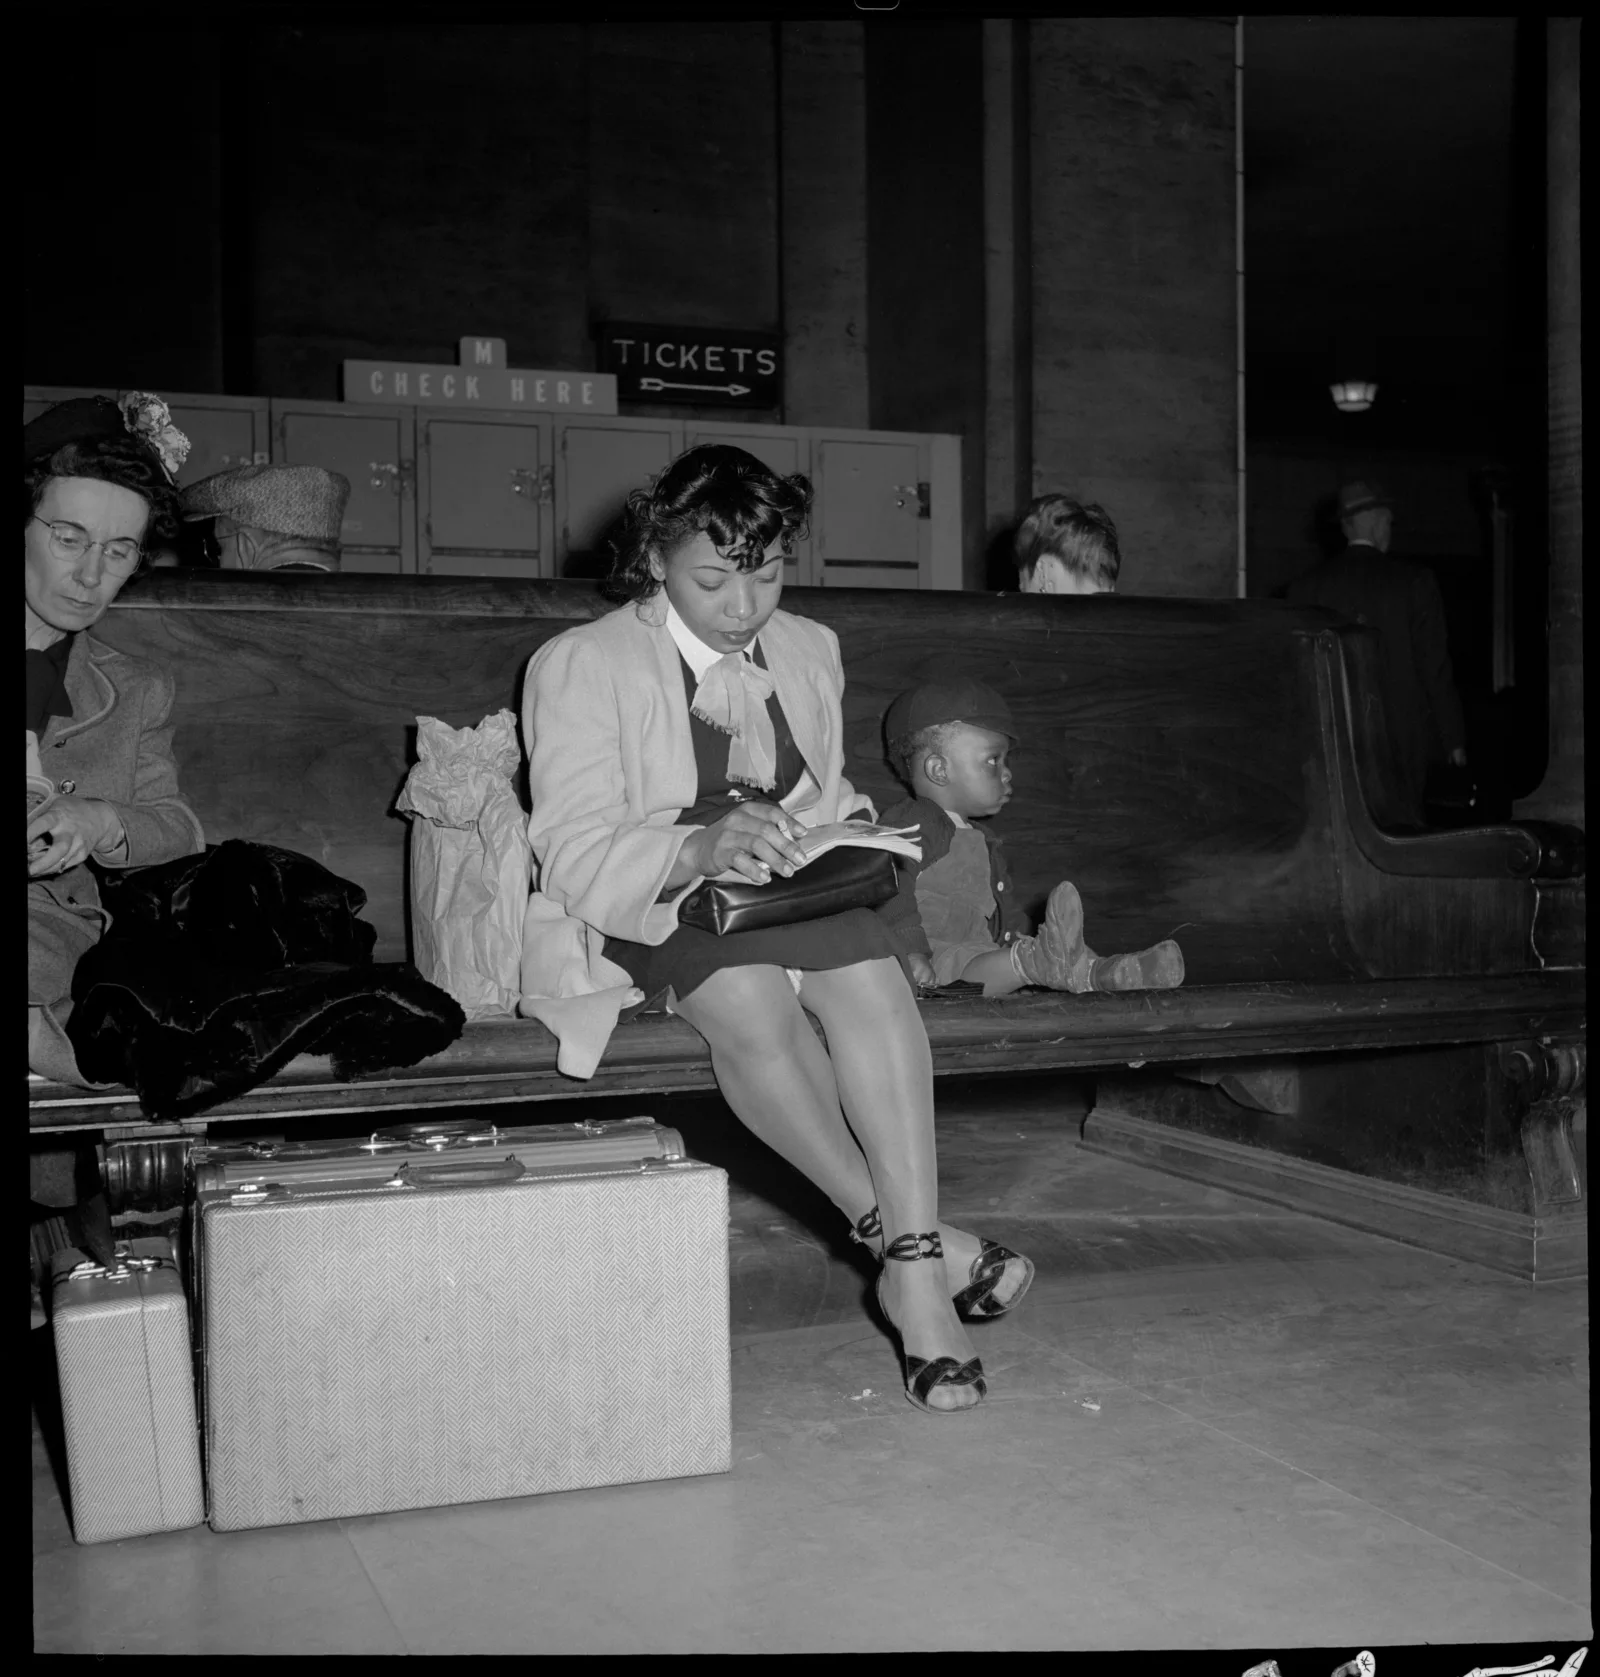 A woman and young boy sitting on a bench in the waiting room, luggage at their feet. The woman is reading, the boy is gazing off to his left.